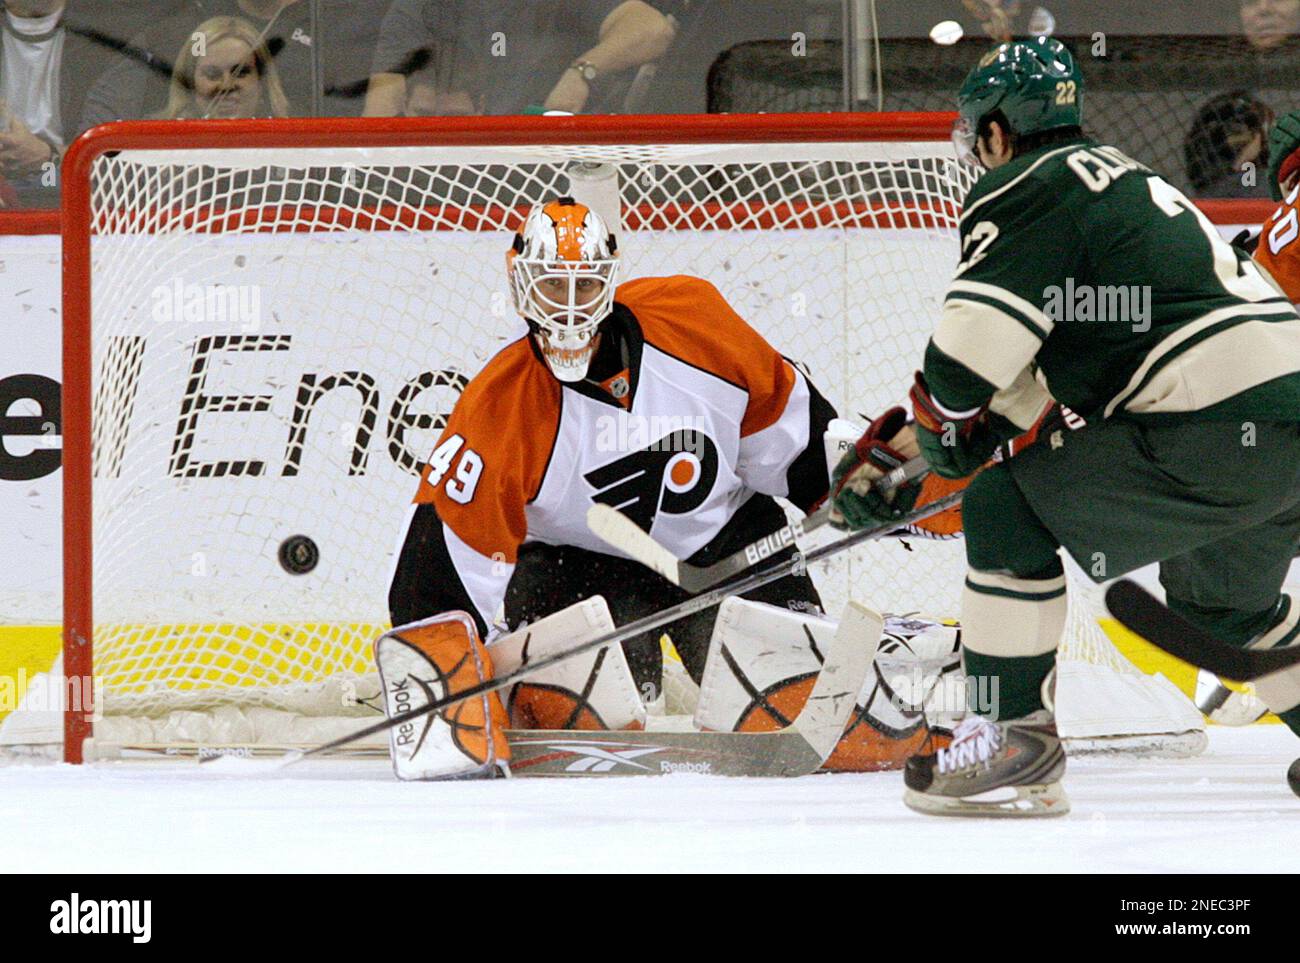 Philadelphia Flyers goalie Michael Leighton during the second period of  game four of the 2010 Stanley Cup Final in Philadelphia on June 4, 2010.  The Flyers defeated the Blackhawks 5-3. UPI/Kevin Dietsch